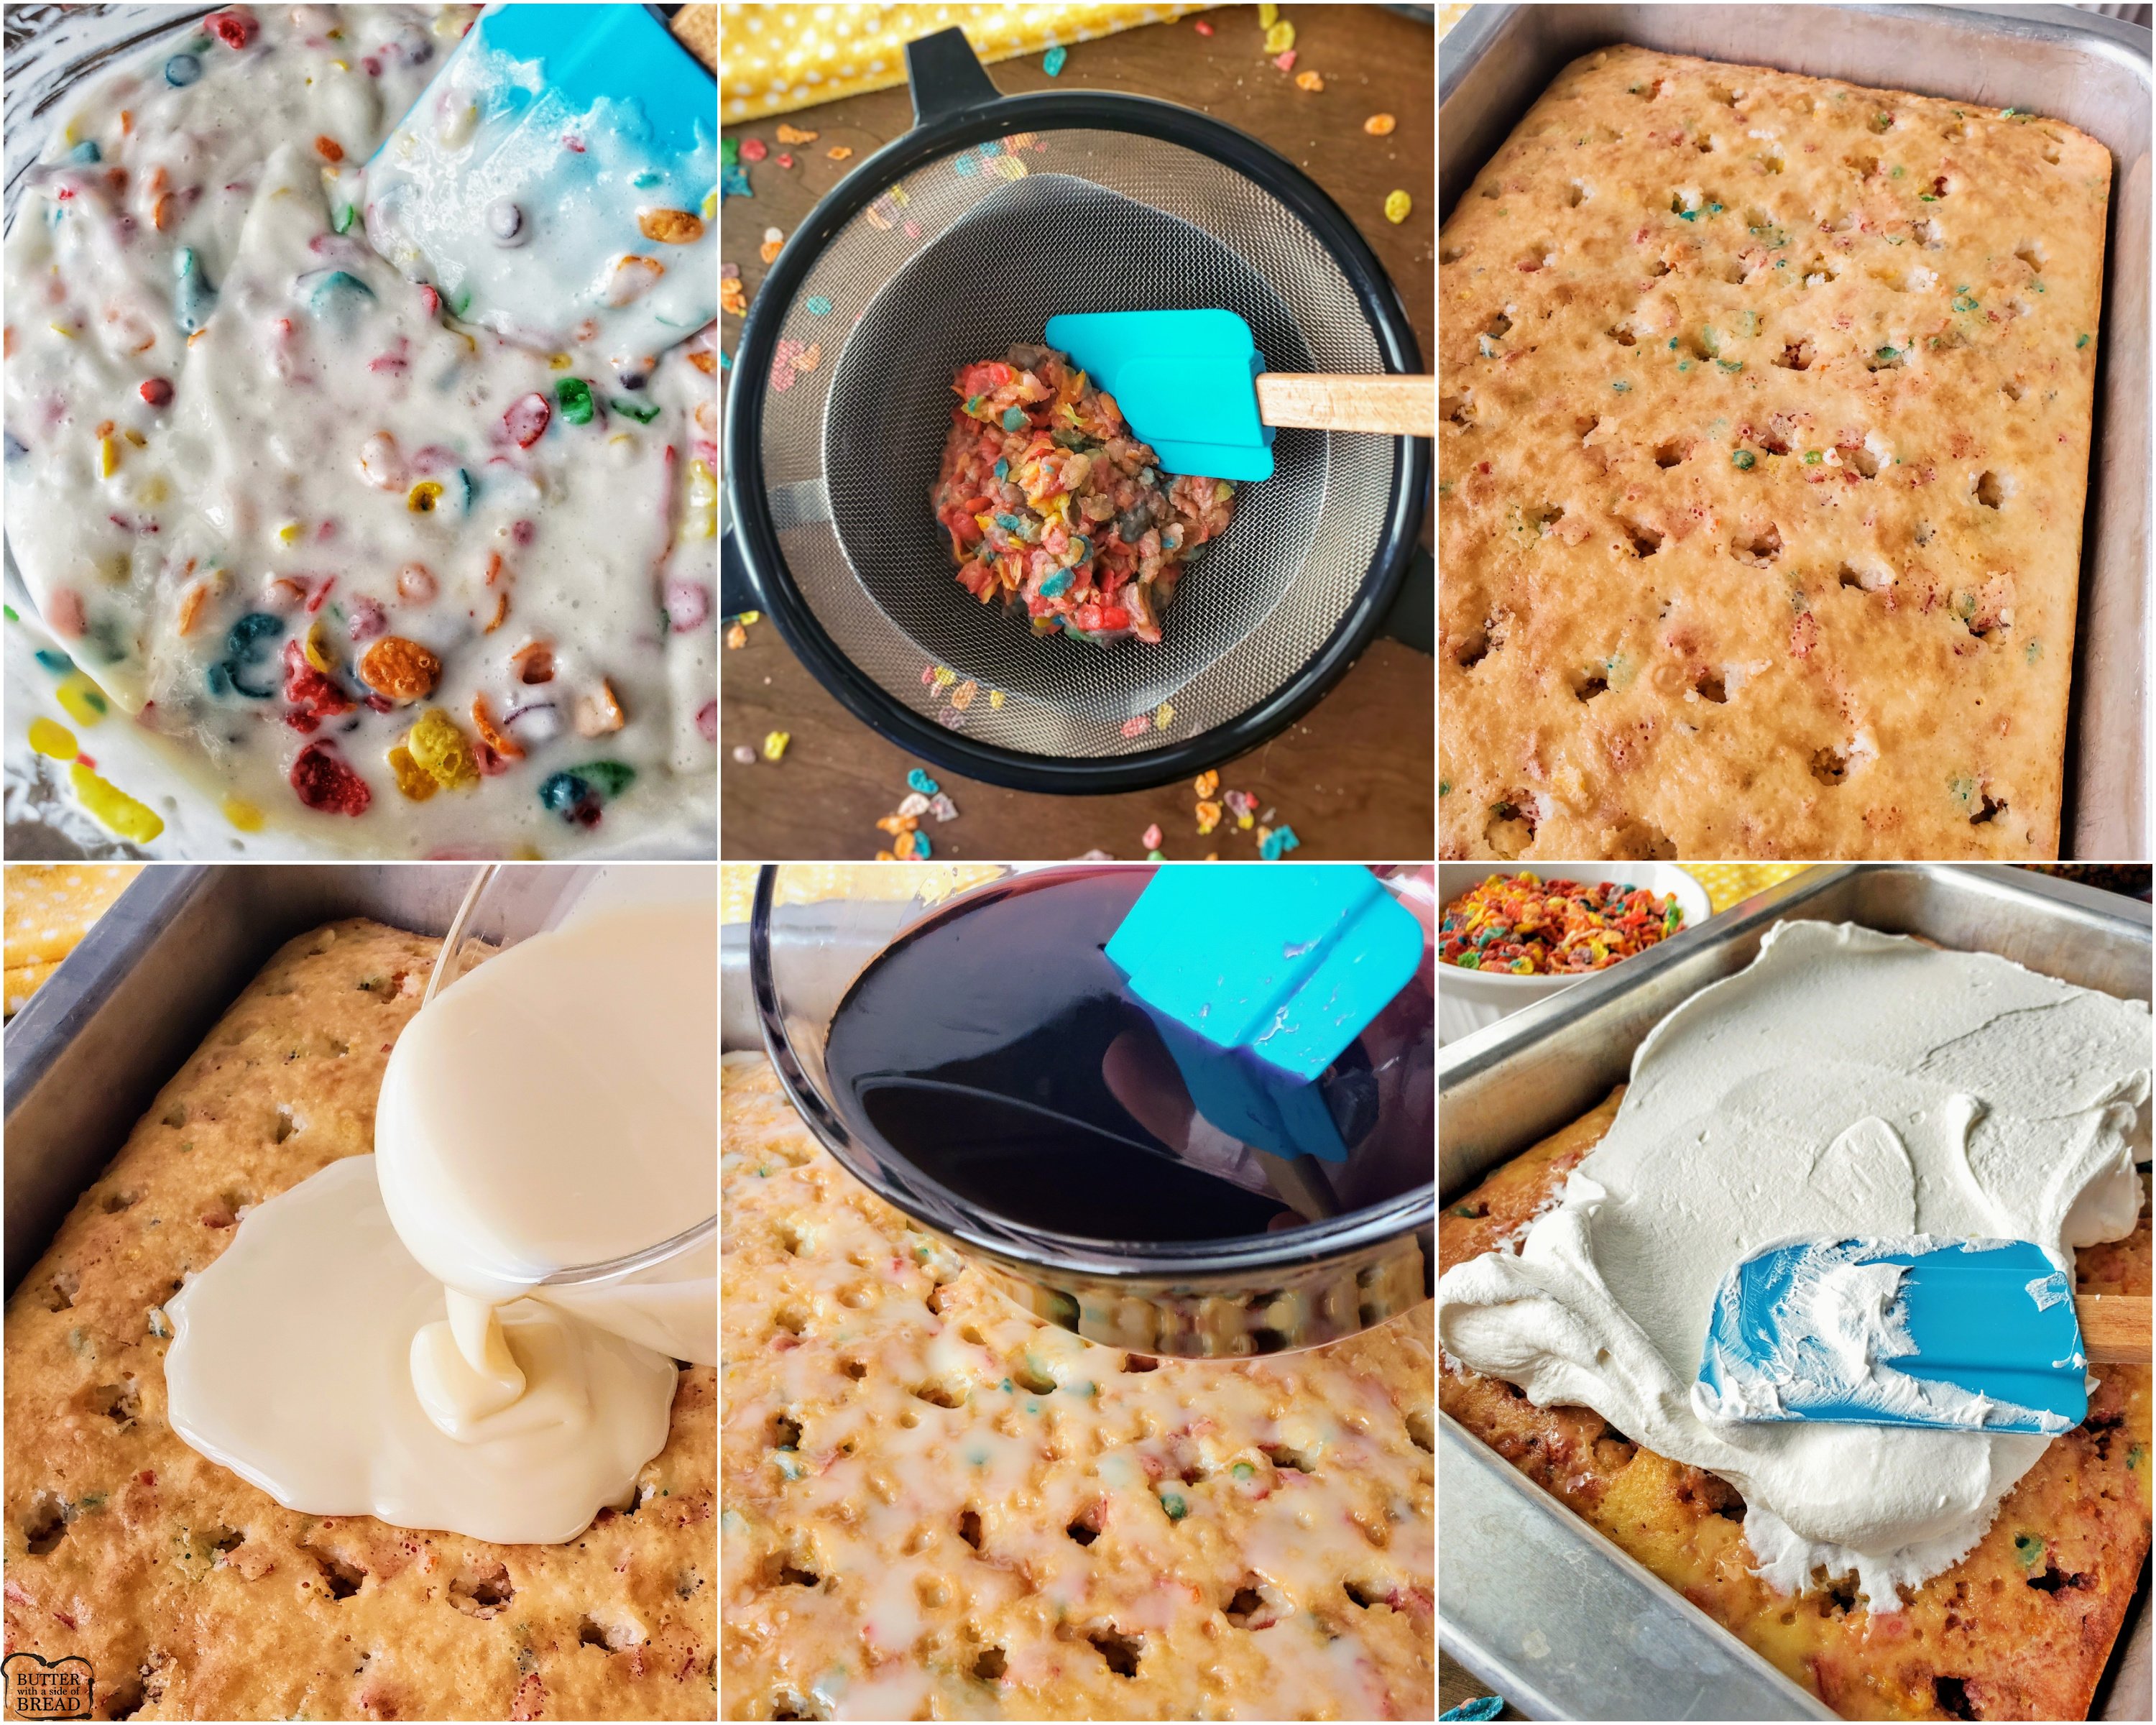 how to make a Poke cake recipe with Fruity Pebbles cereal